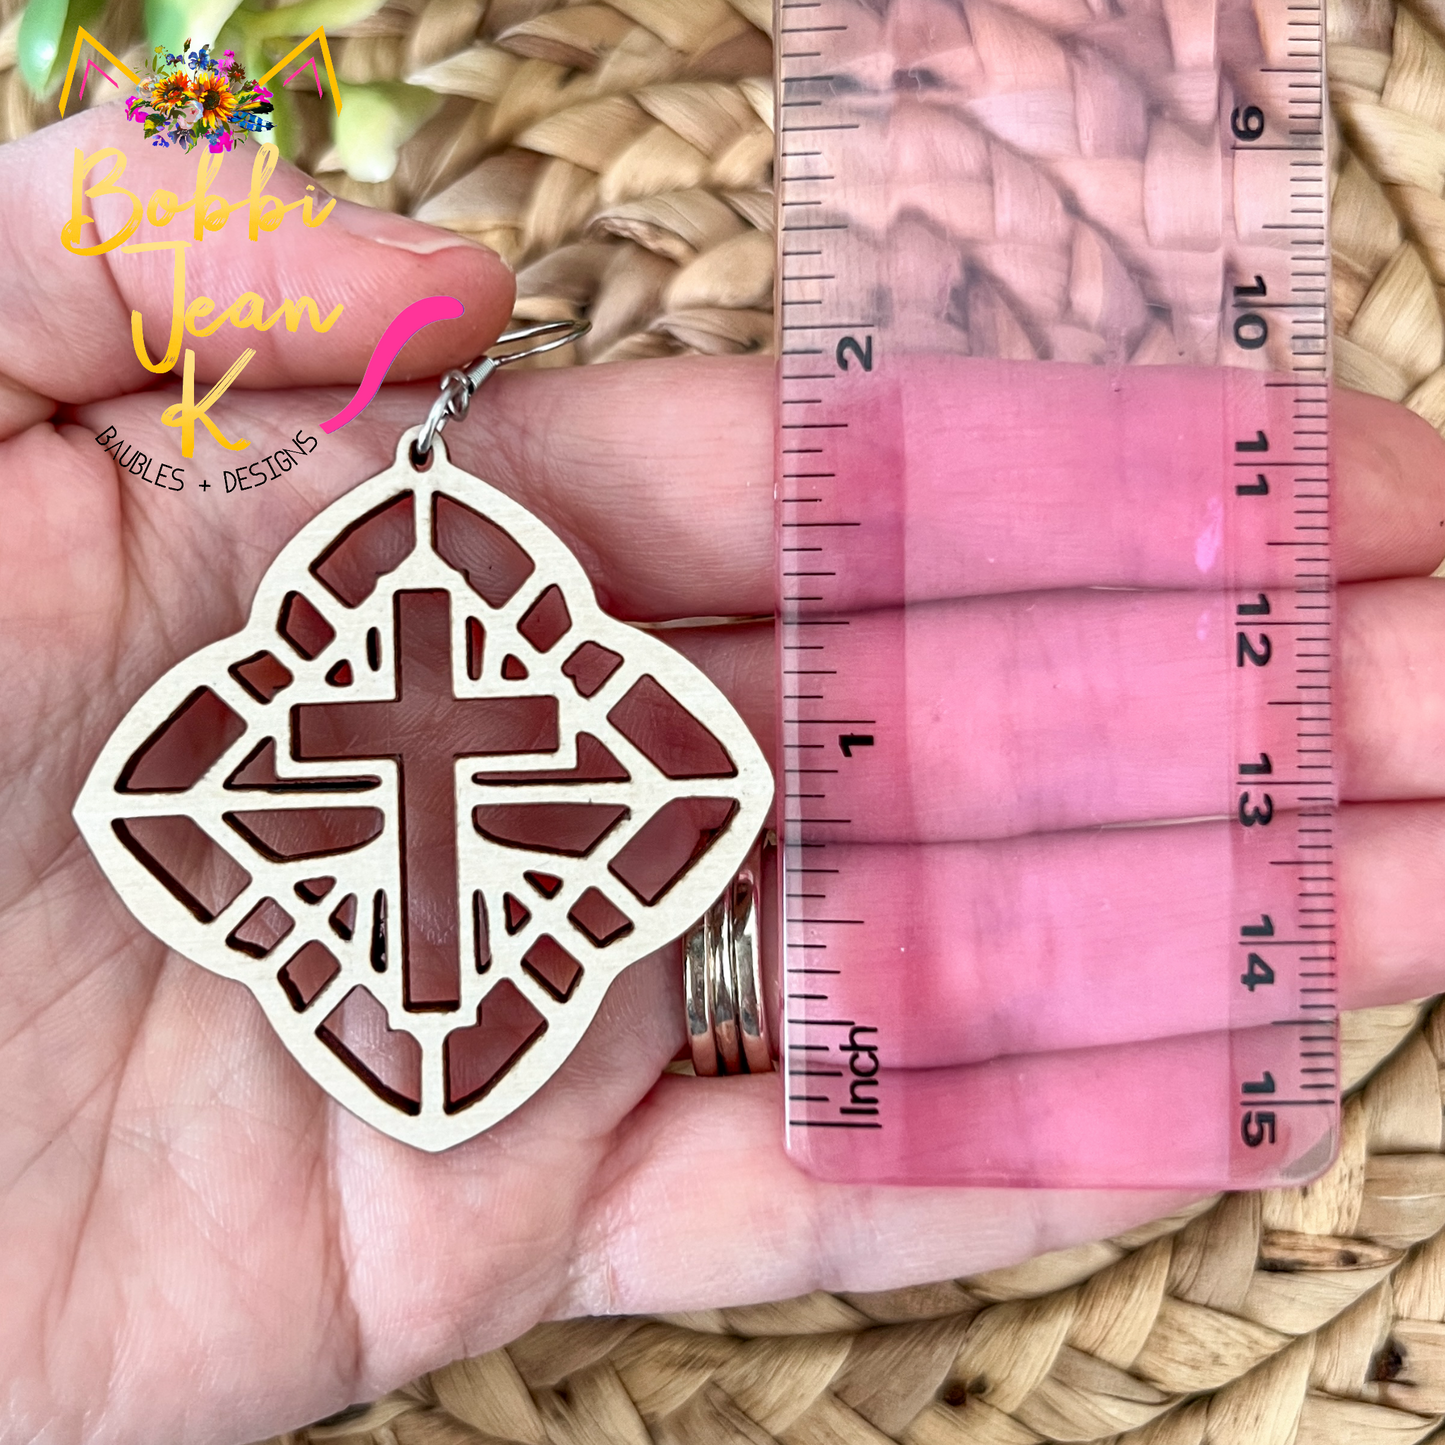 Detailed Cross Dyed Wood Earrings: Choose From 3 Colors